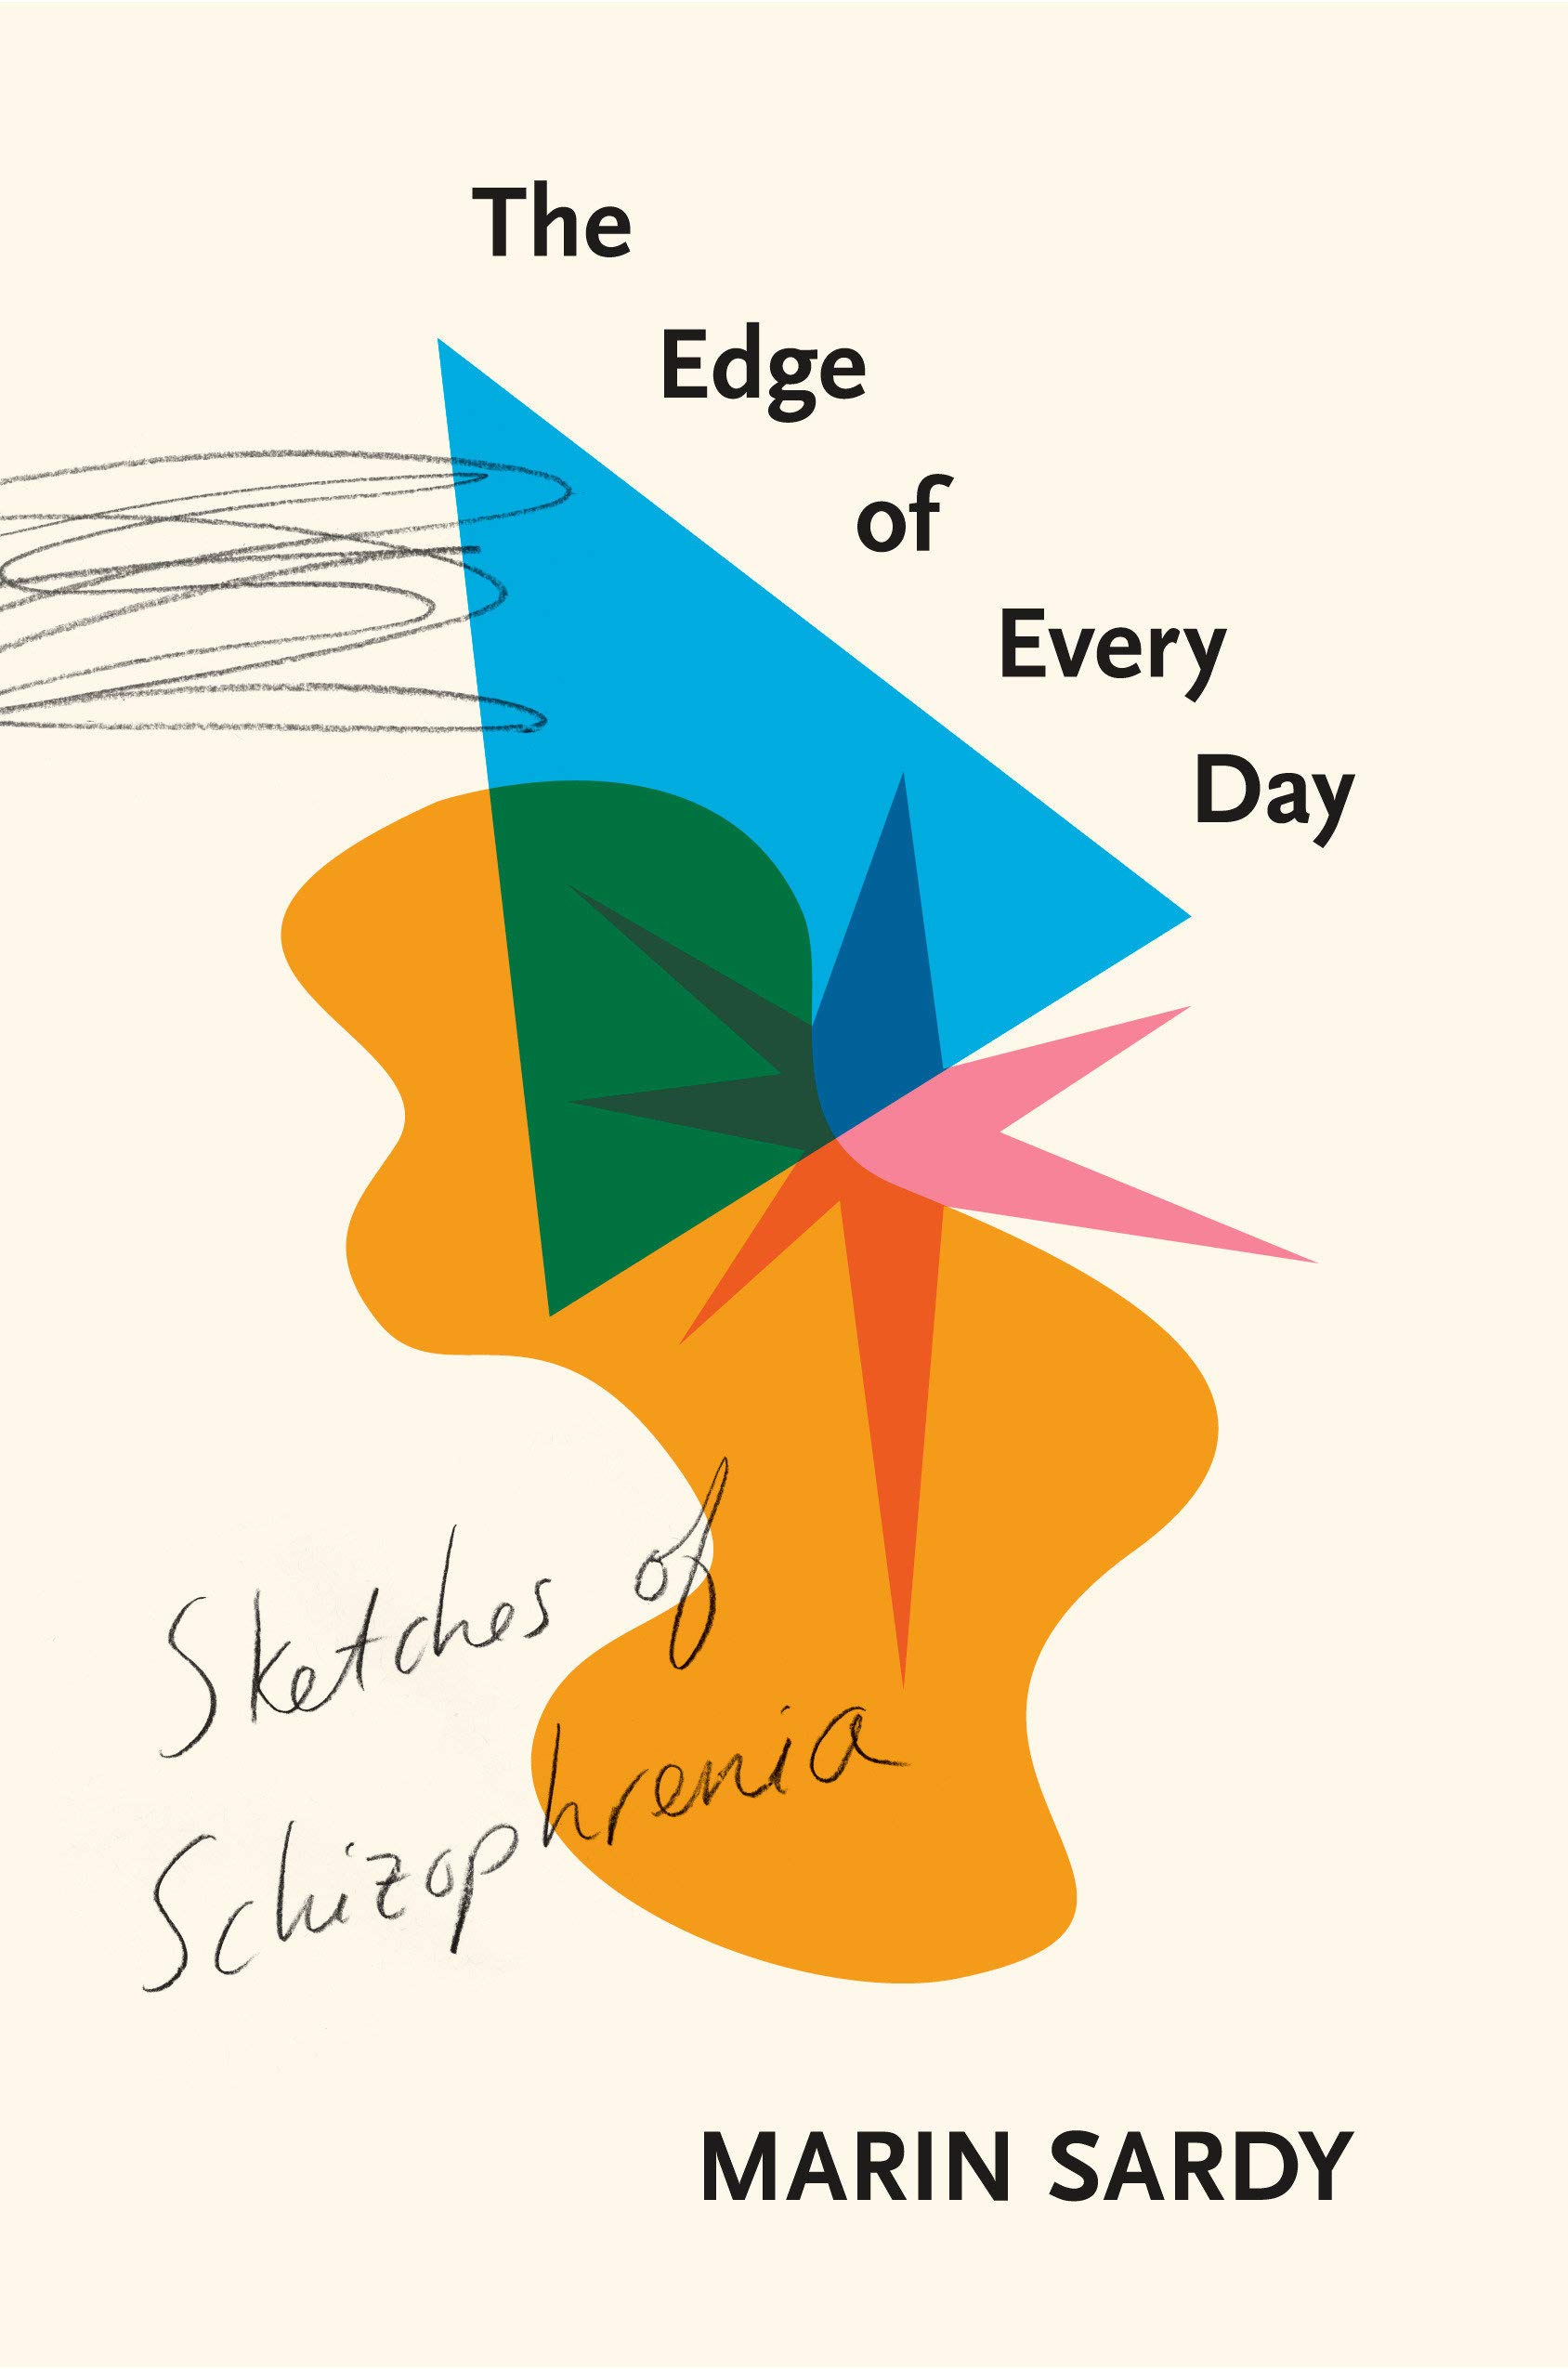 The Edge of Every Day by Marin Sardy